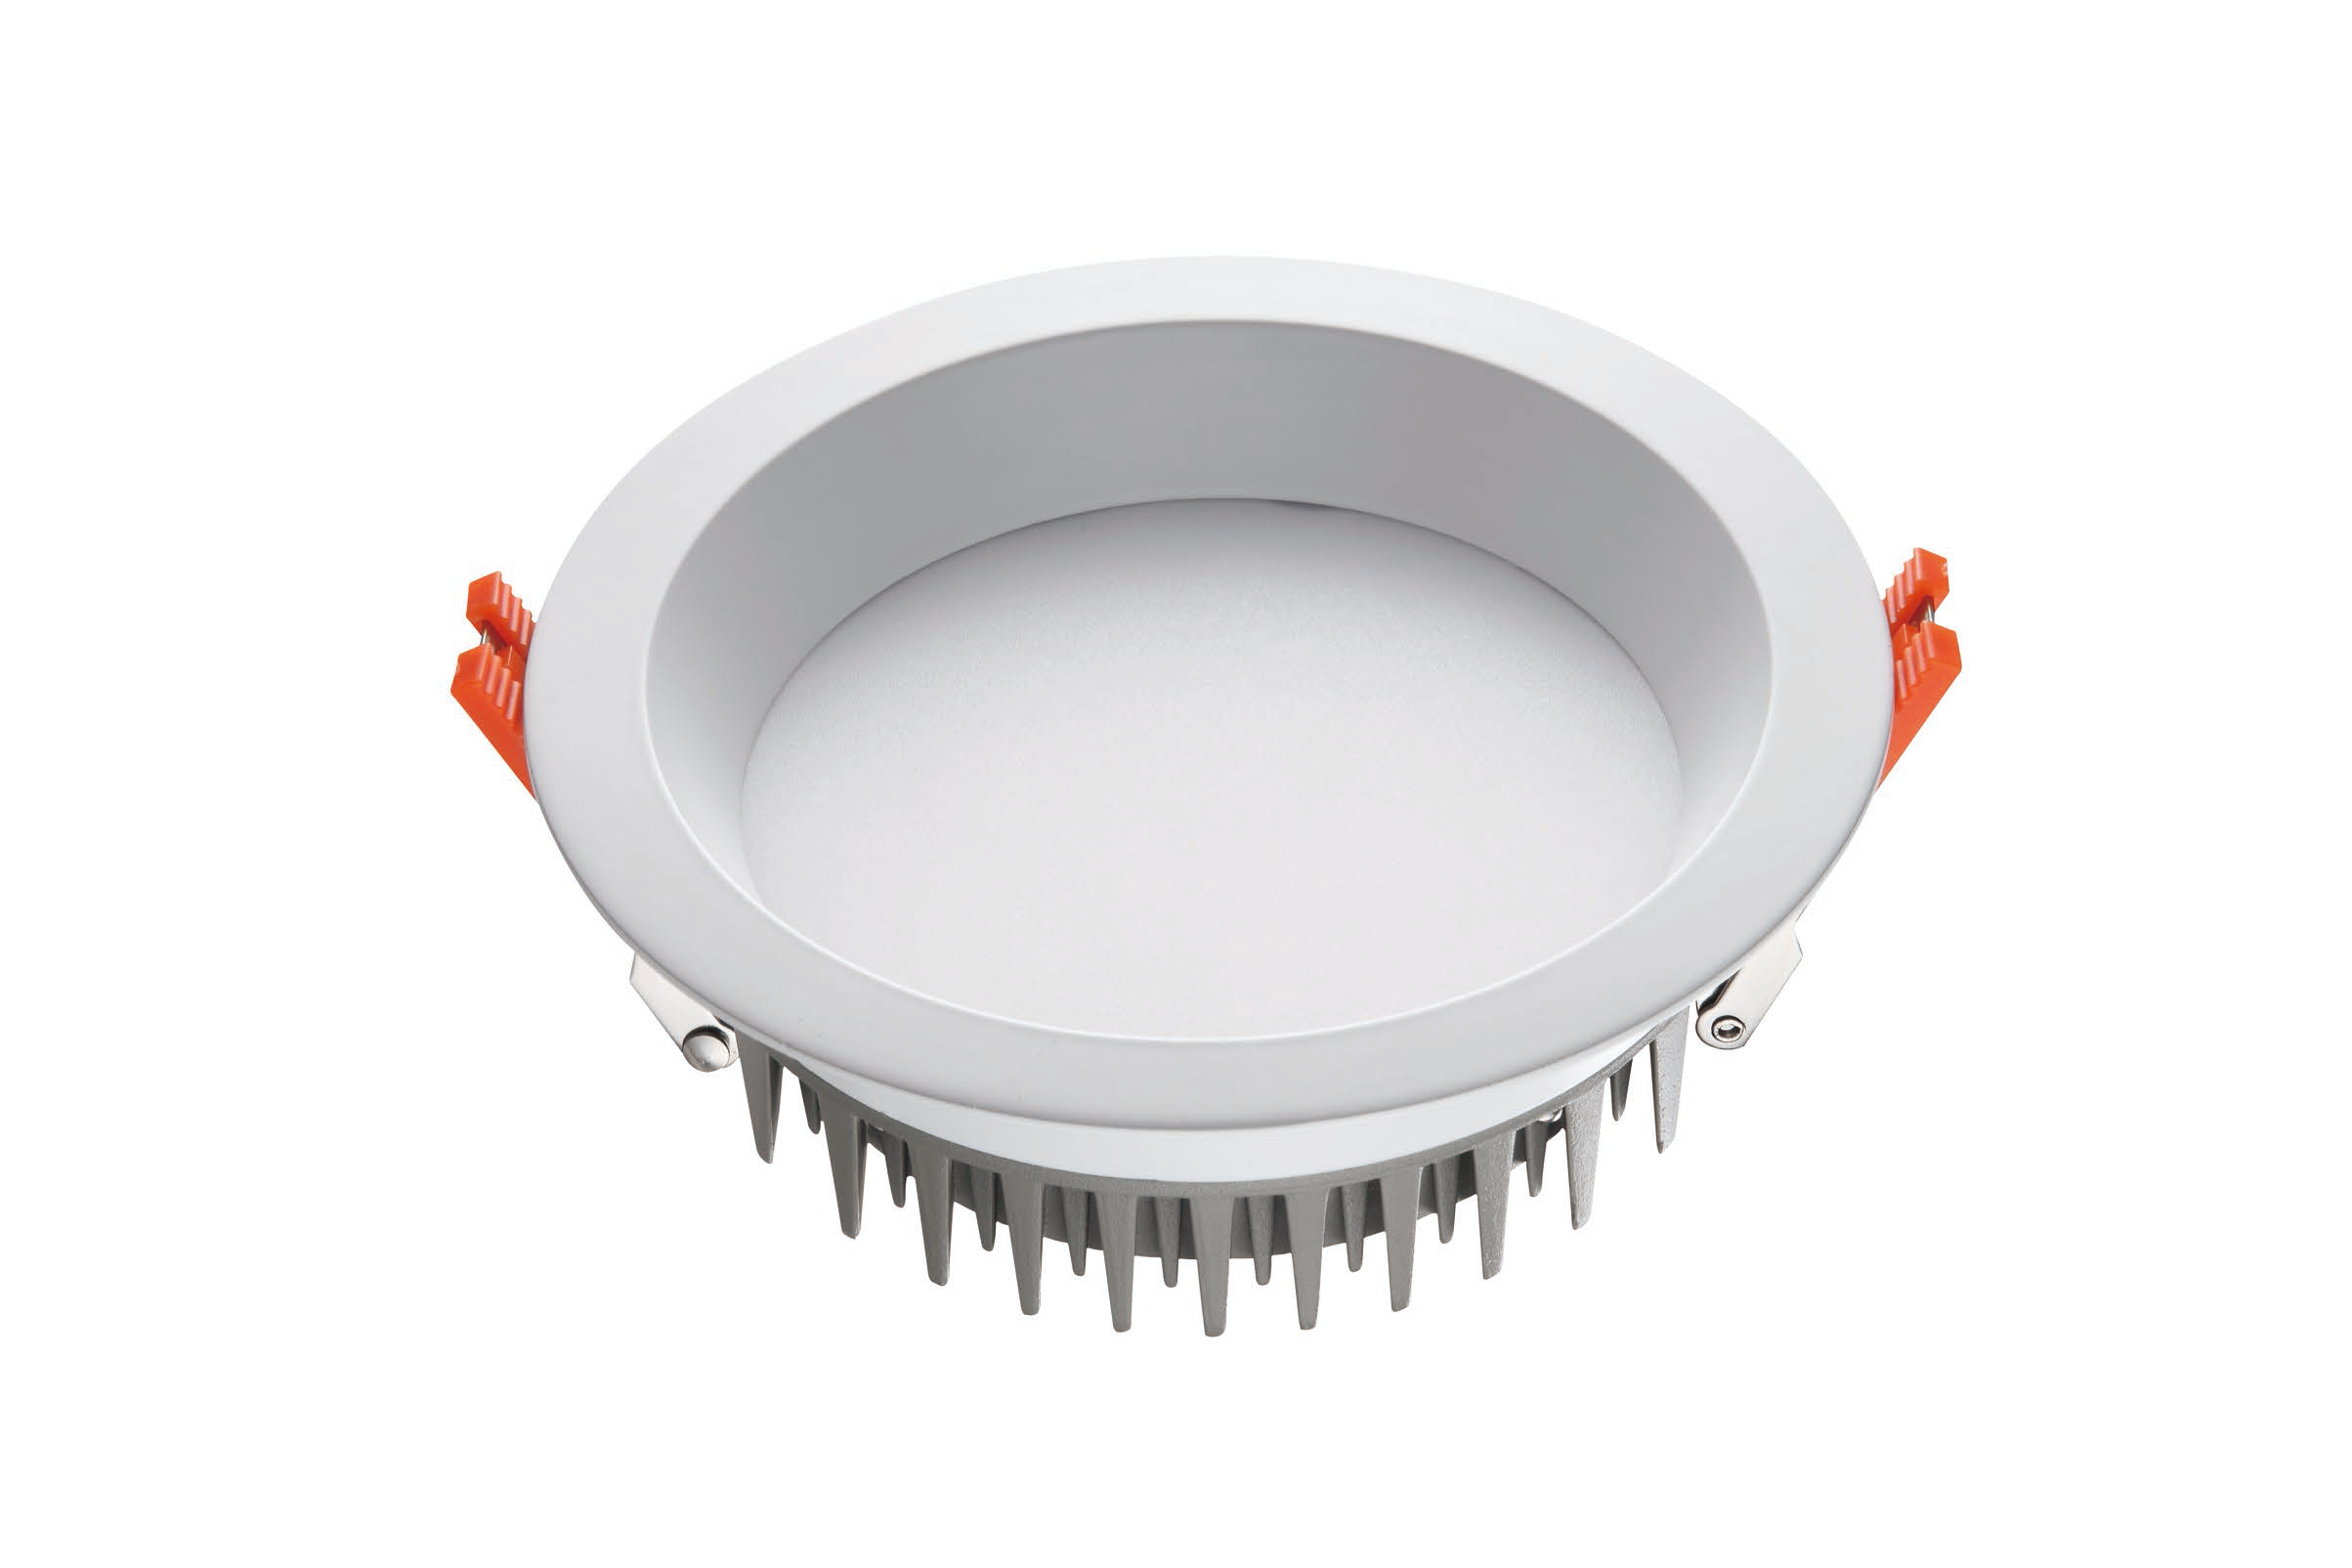 LED Recessed Down Light